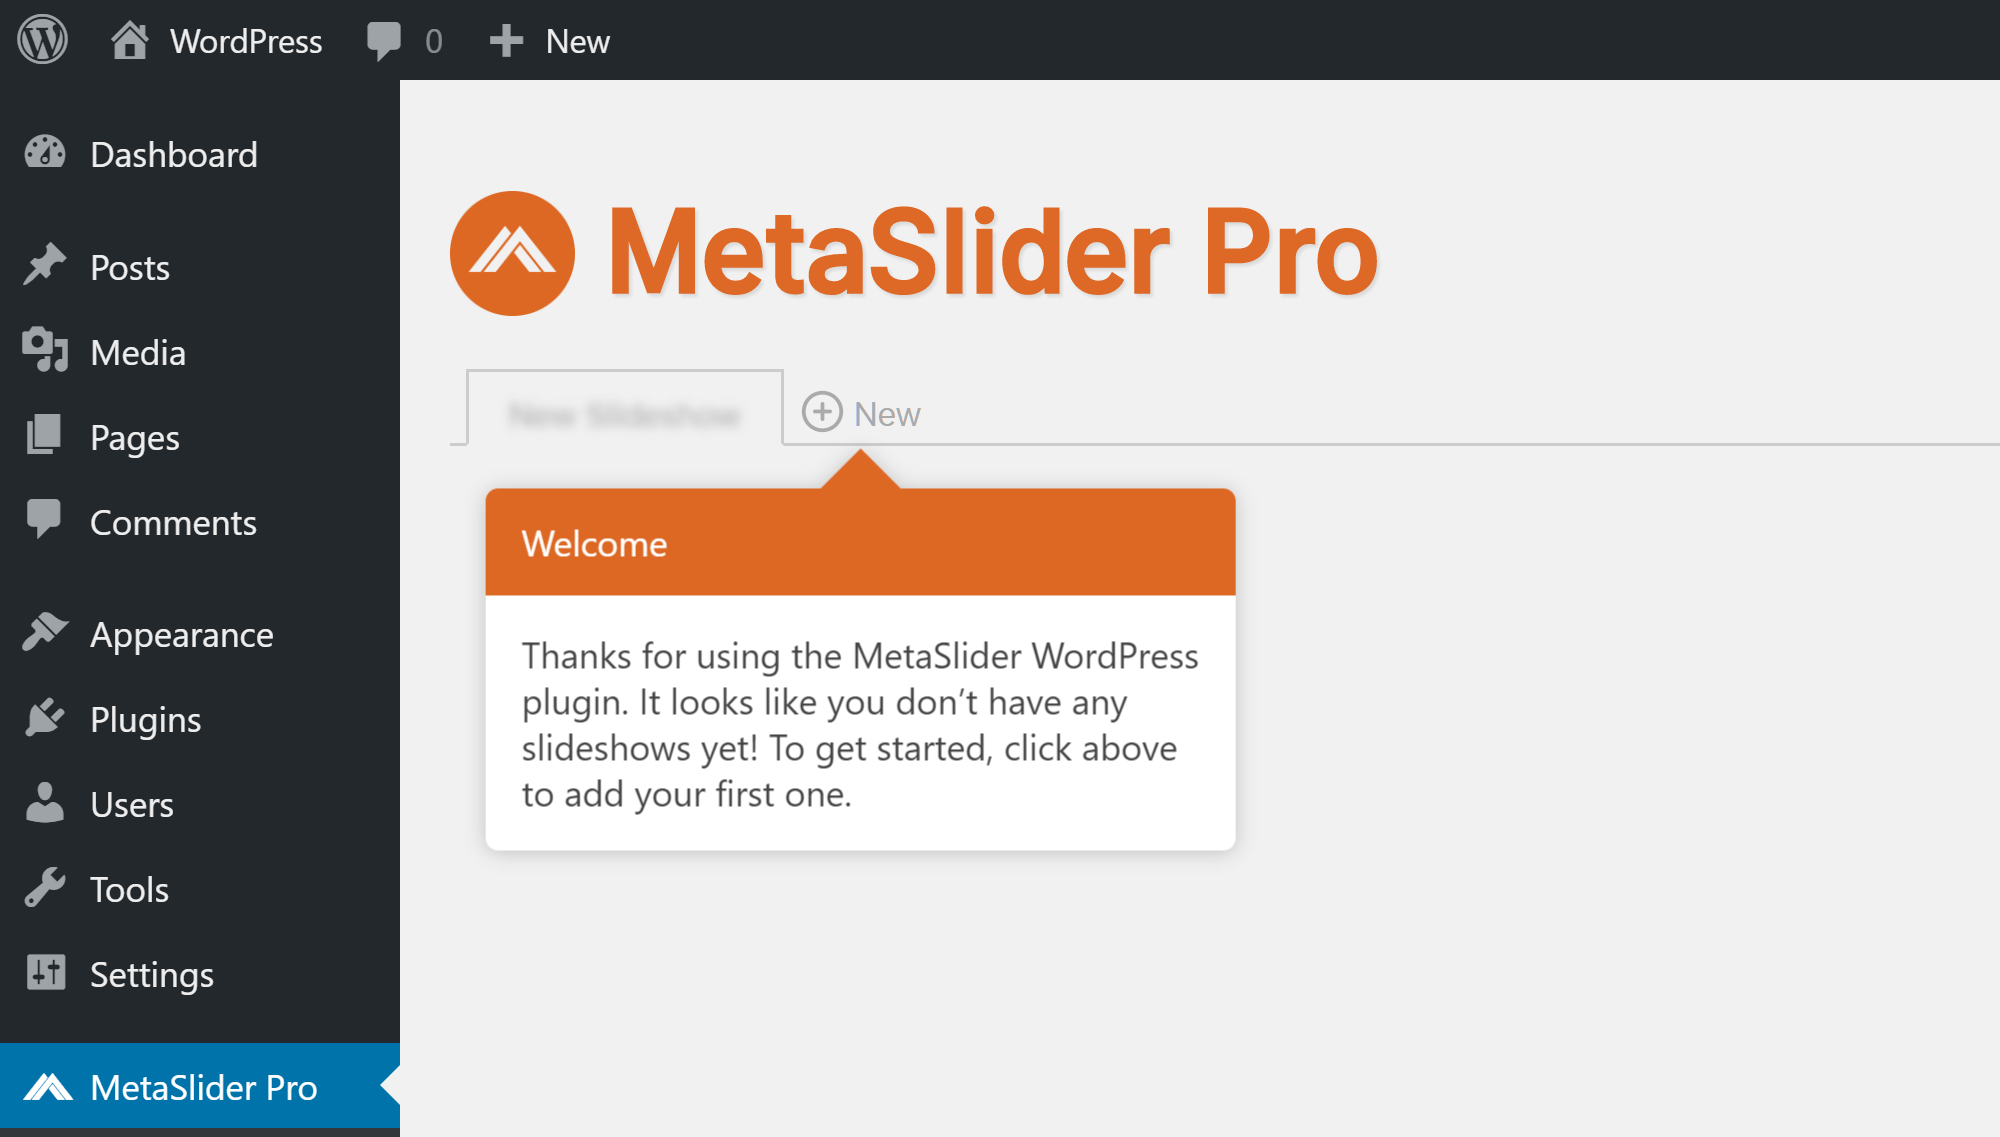 Getting Started with MetaSlider